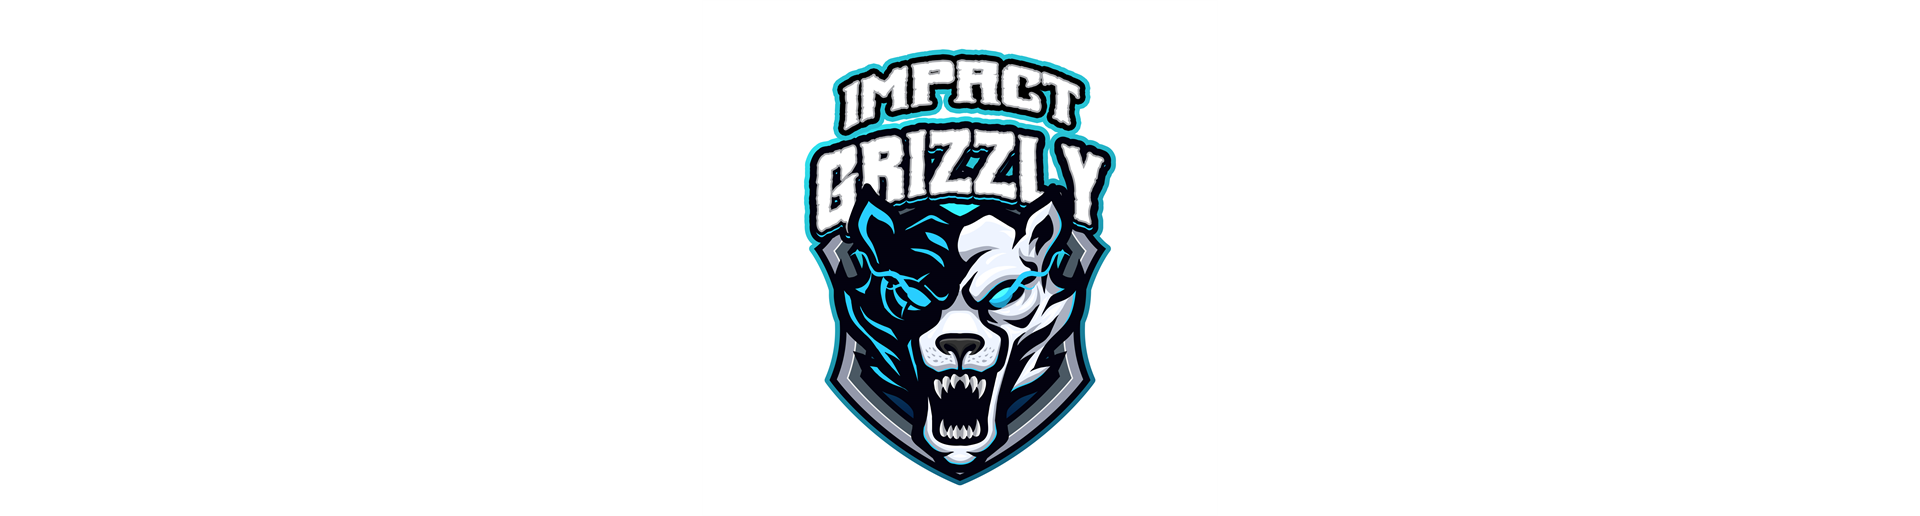 JOIN THE IMPACT GRIZZLY!!!